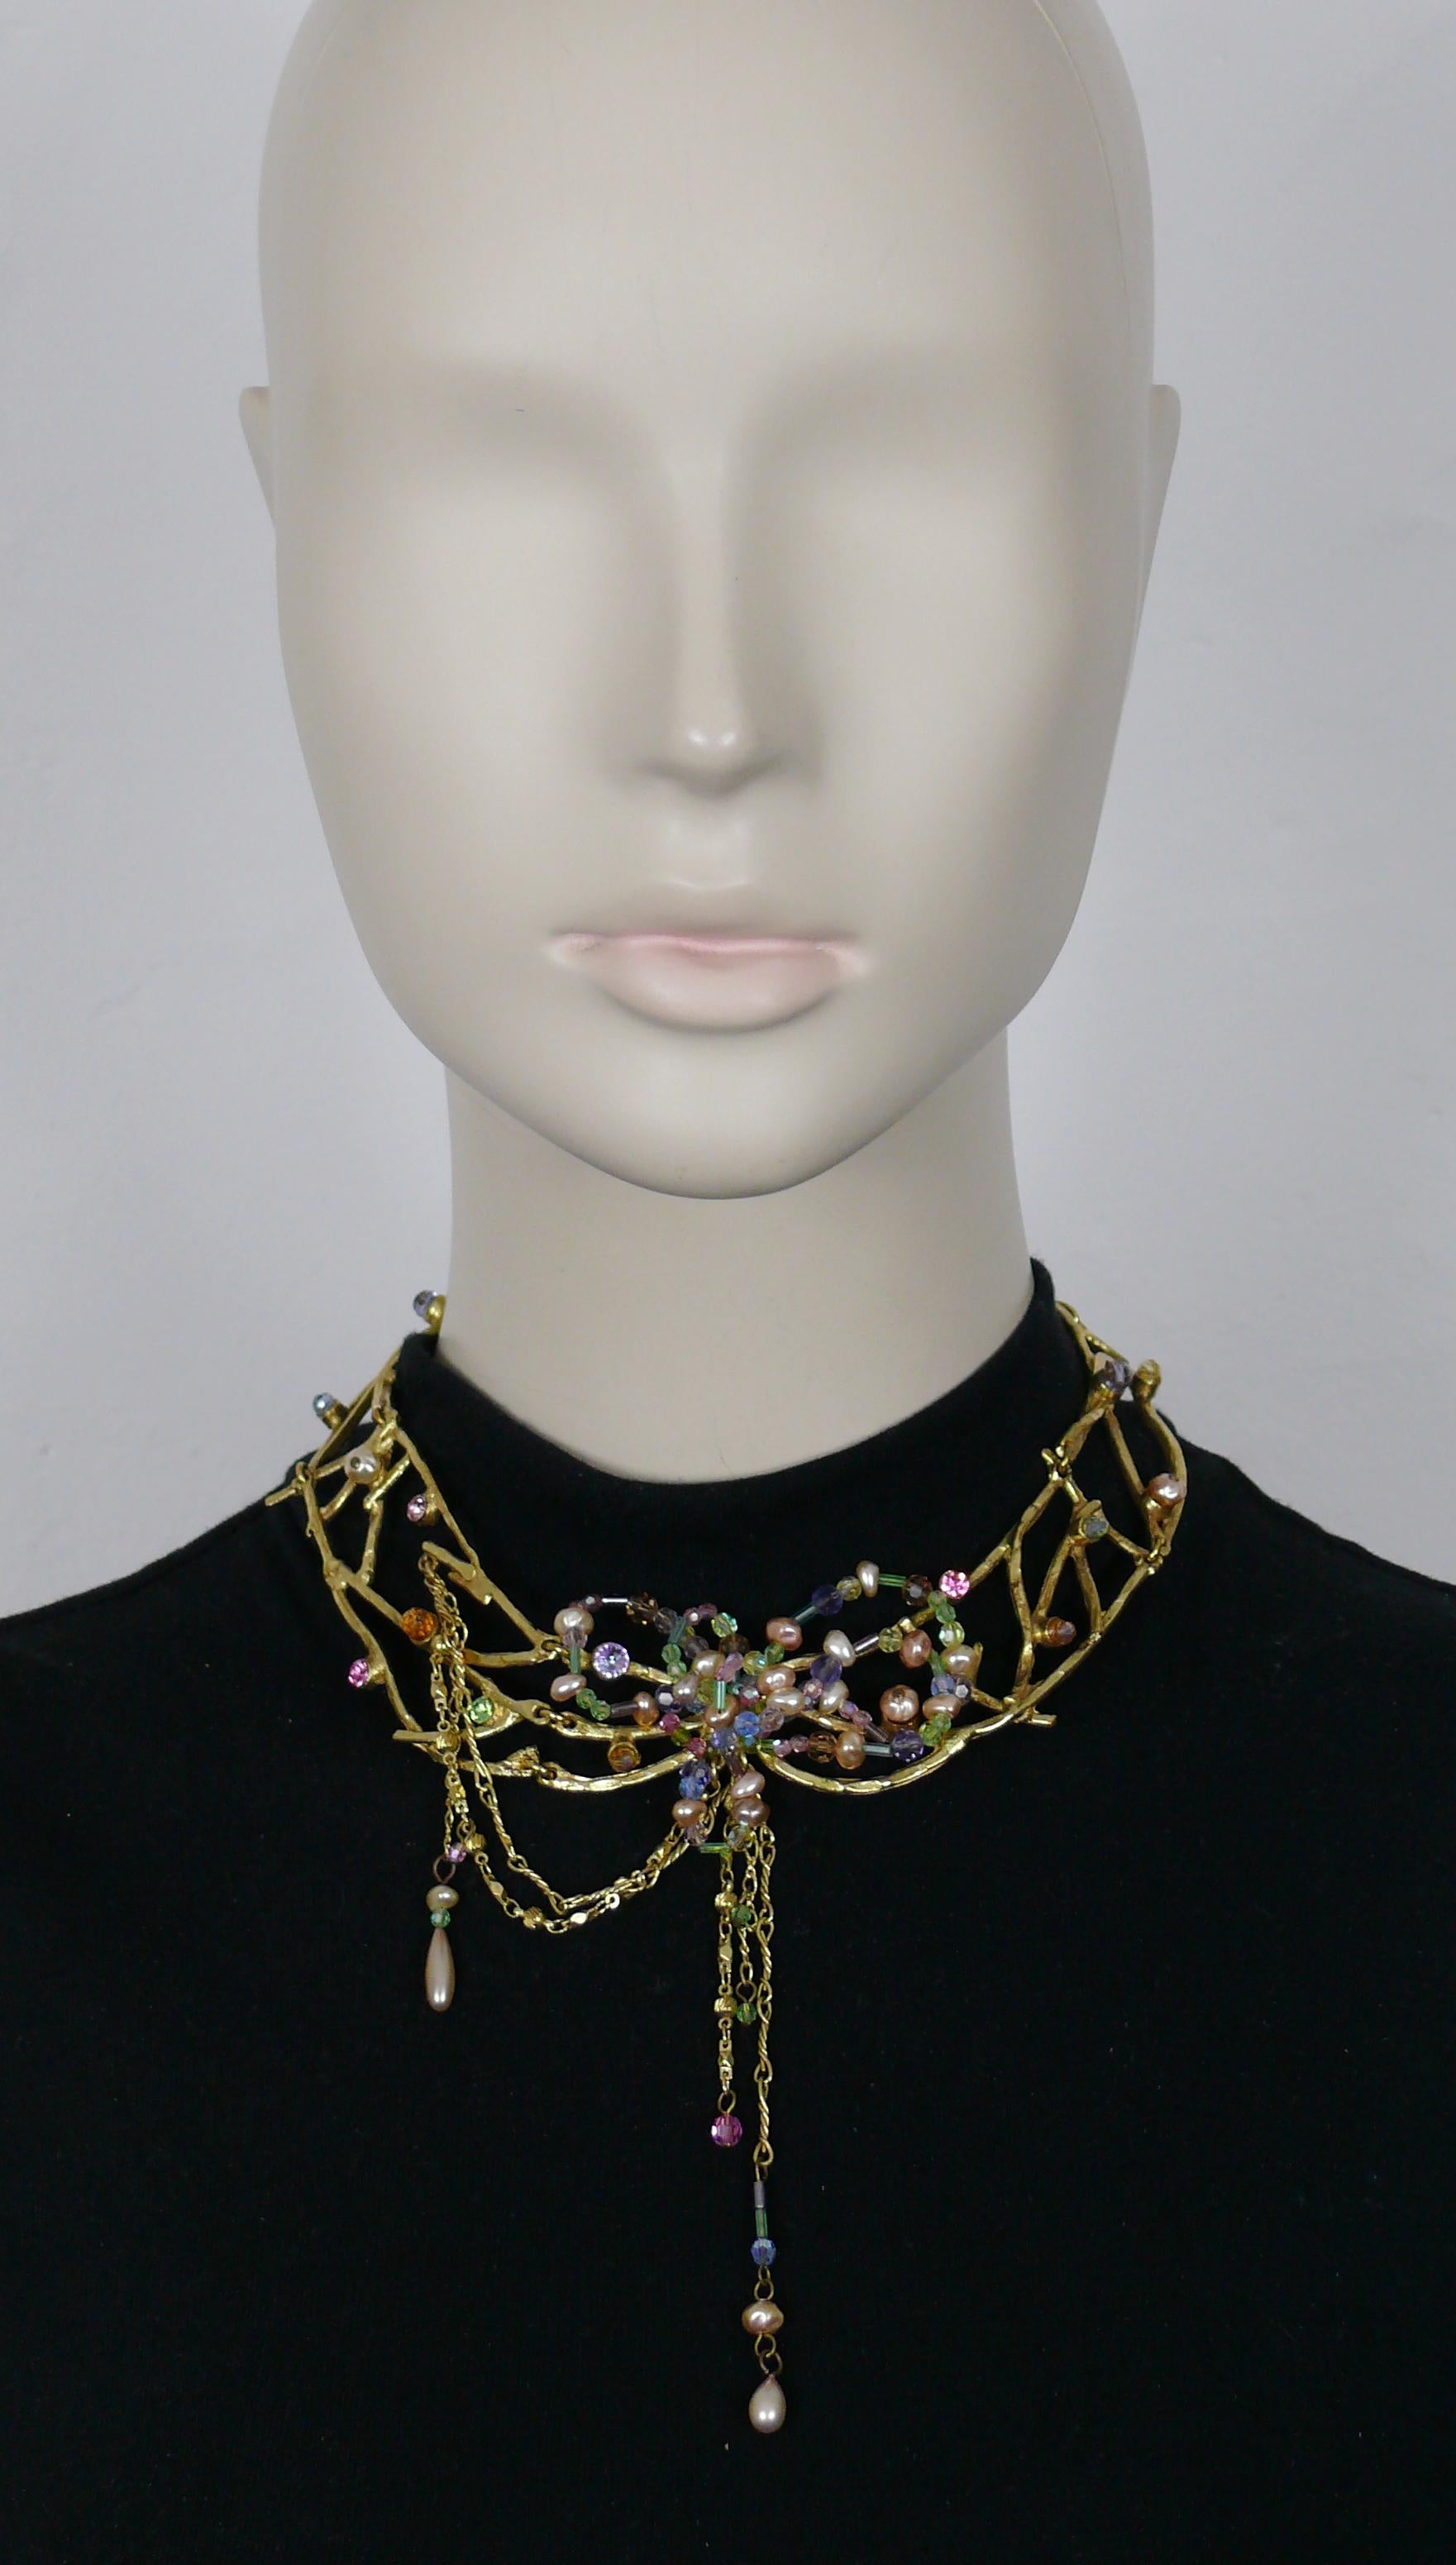 CHRISTIAN LACROIX vintage gold tone choker necklace featuring intertwined jewelled branches and a stylized flower at the center with multicolor beads and faux pearls.

T-bar toggle closure.
Adjustable length.

Marked CHRISTIAN LACROIX CL Made in